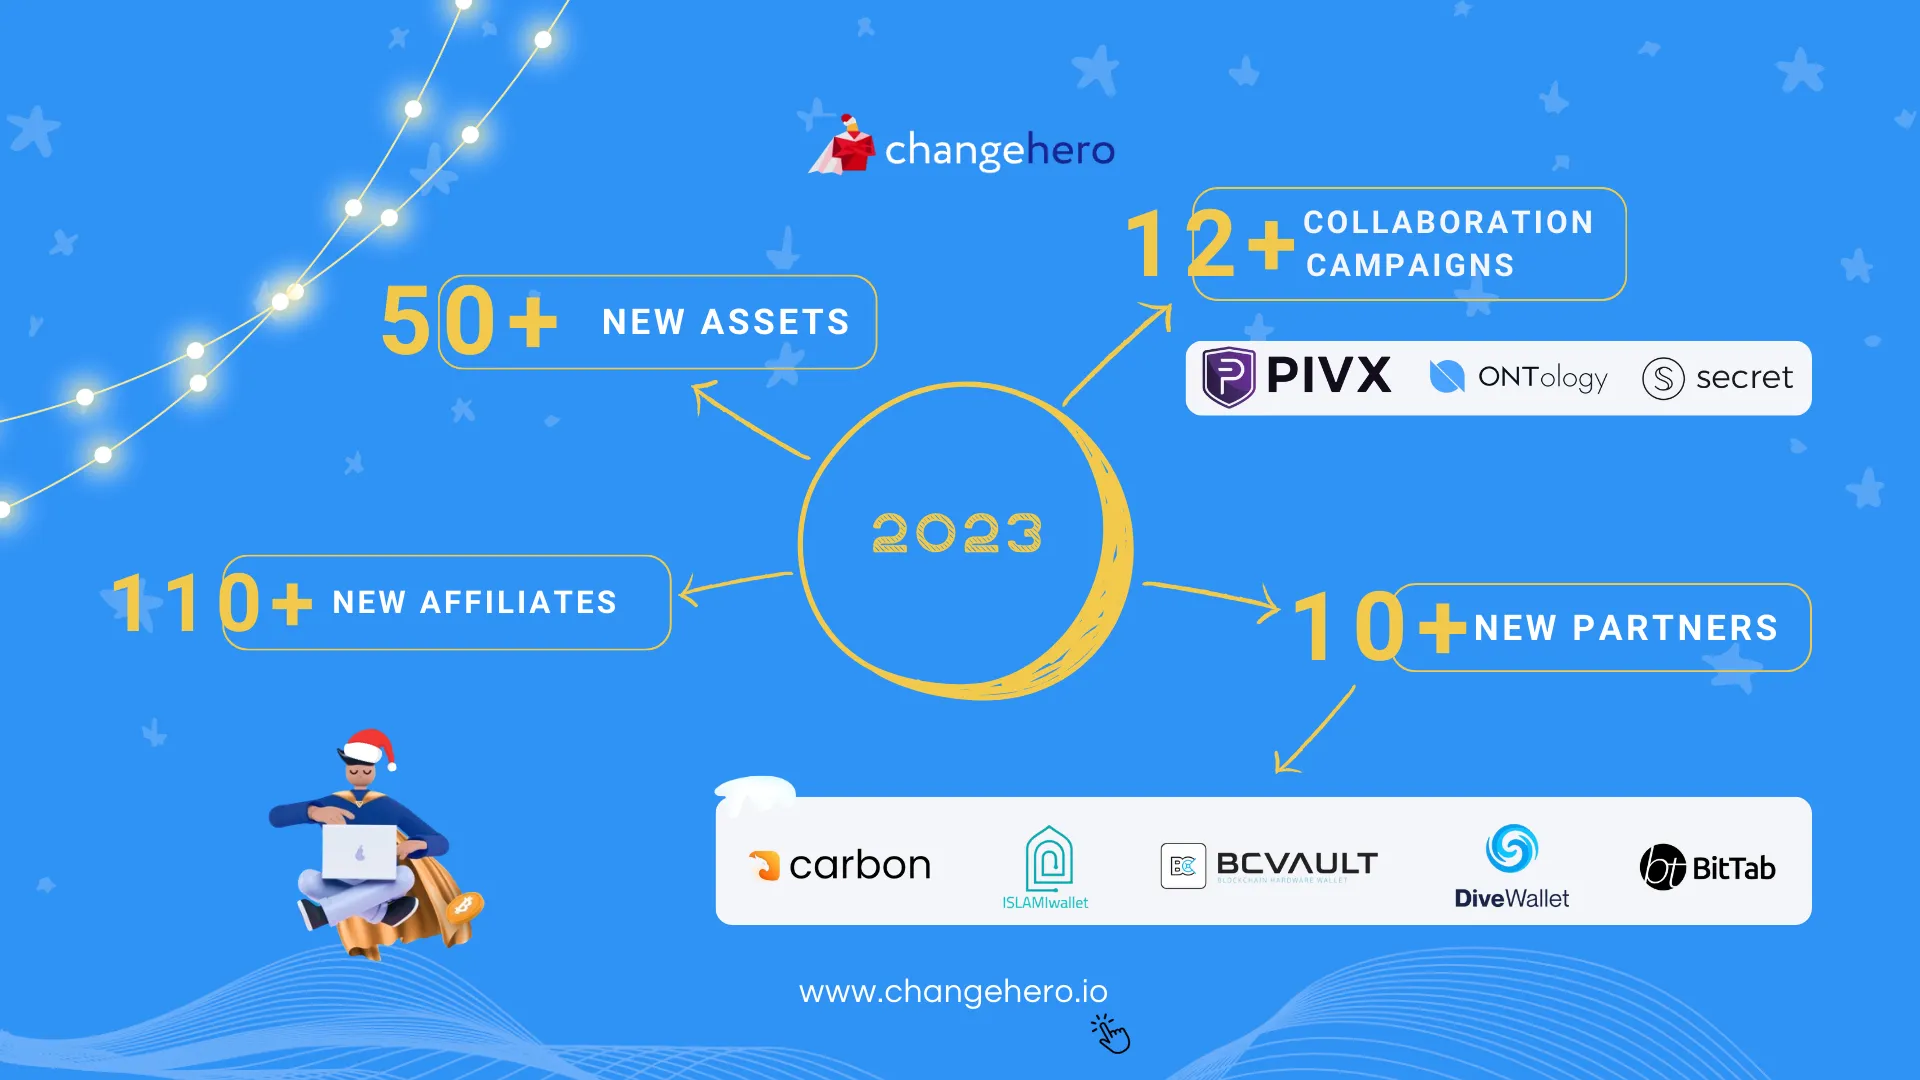 Changehero's achievements in 2023 - 50+ new assets, 110+ new affiliates, 10+ new partners, 12+ collaboration campaigns